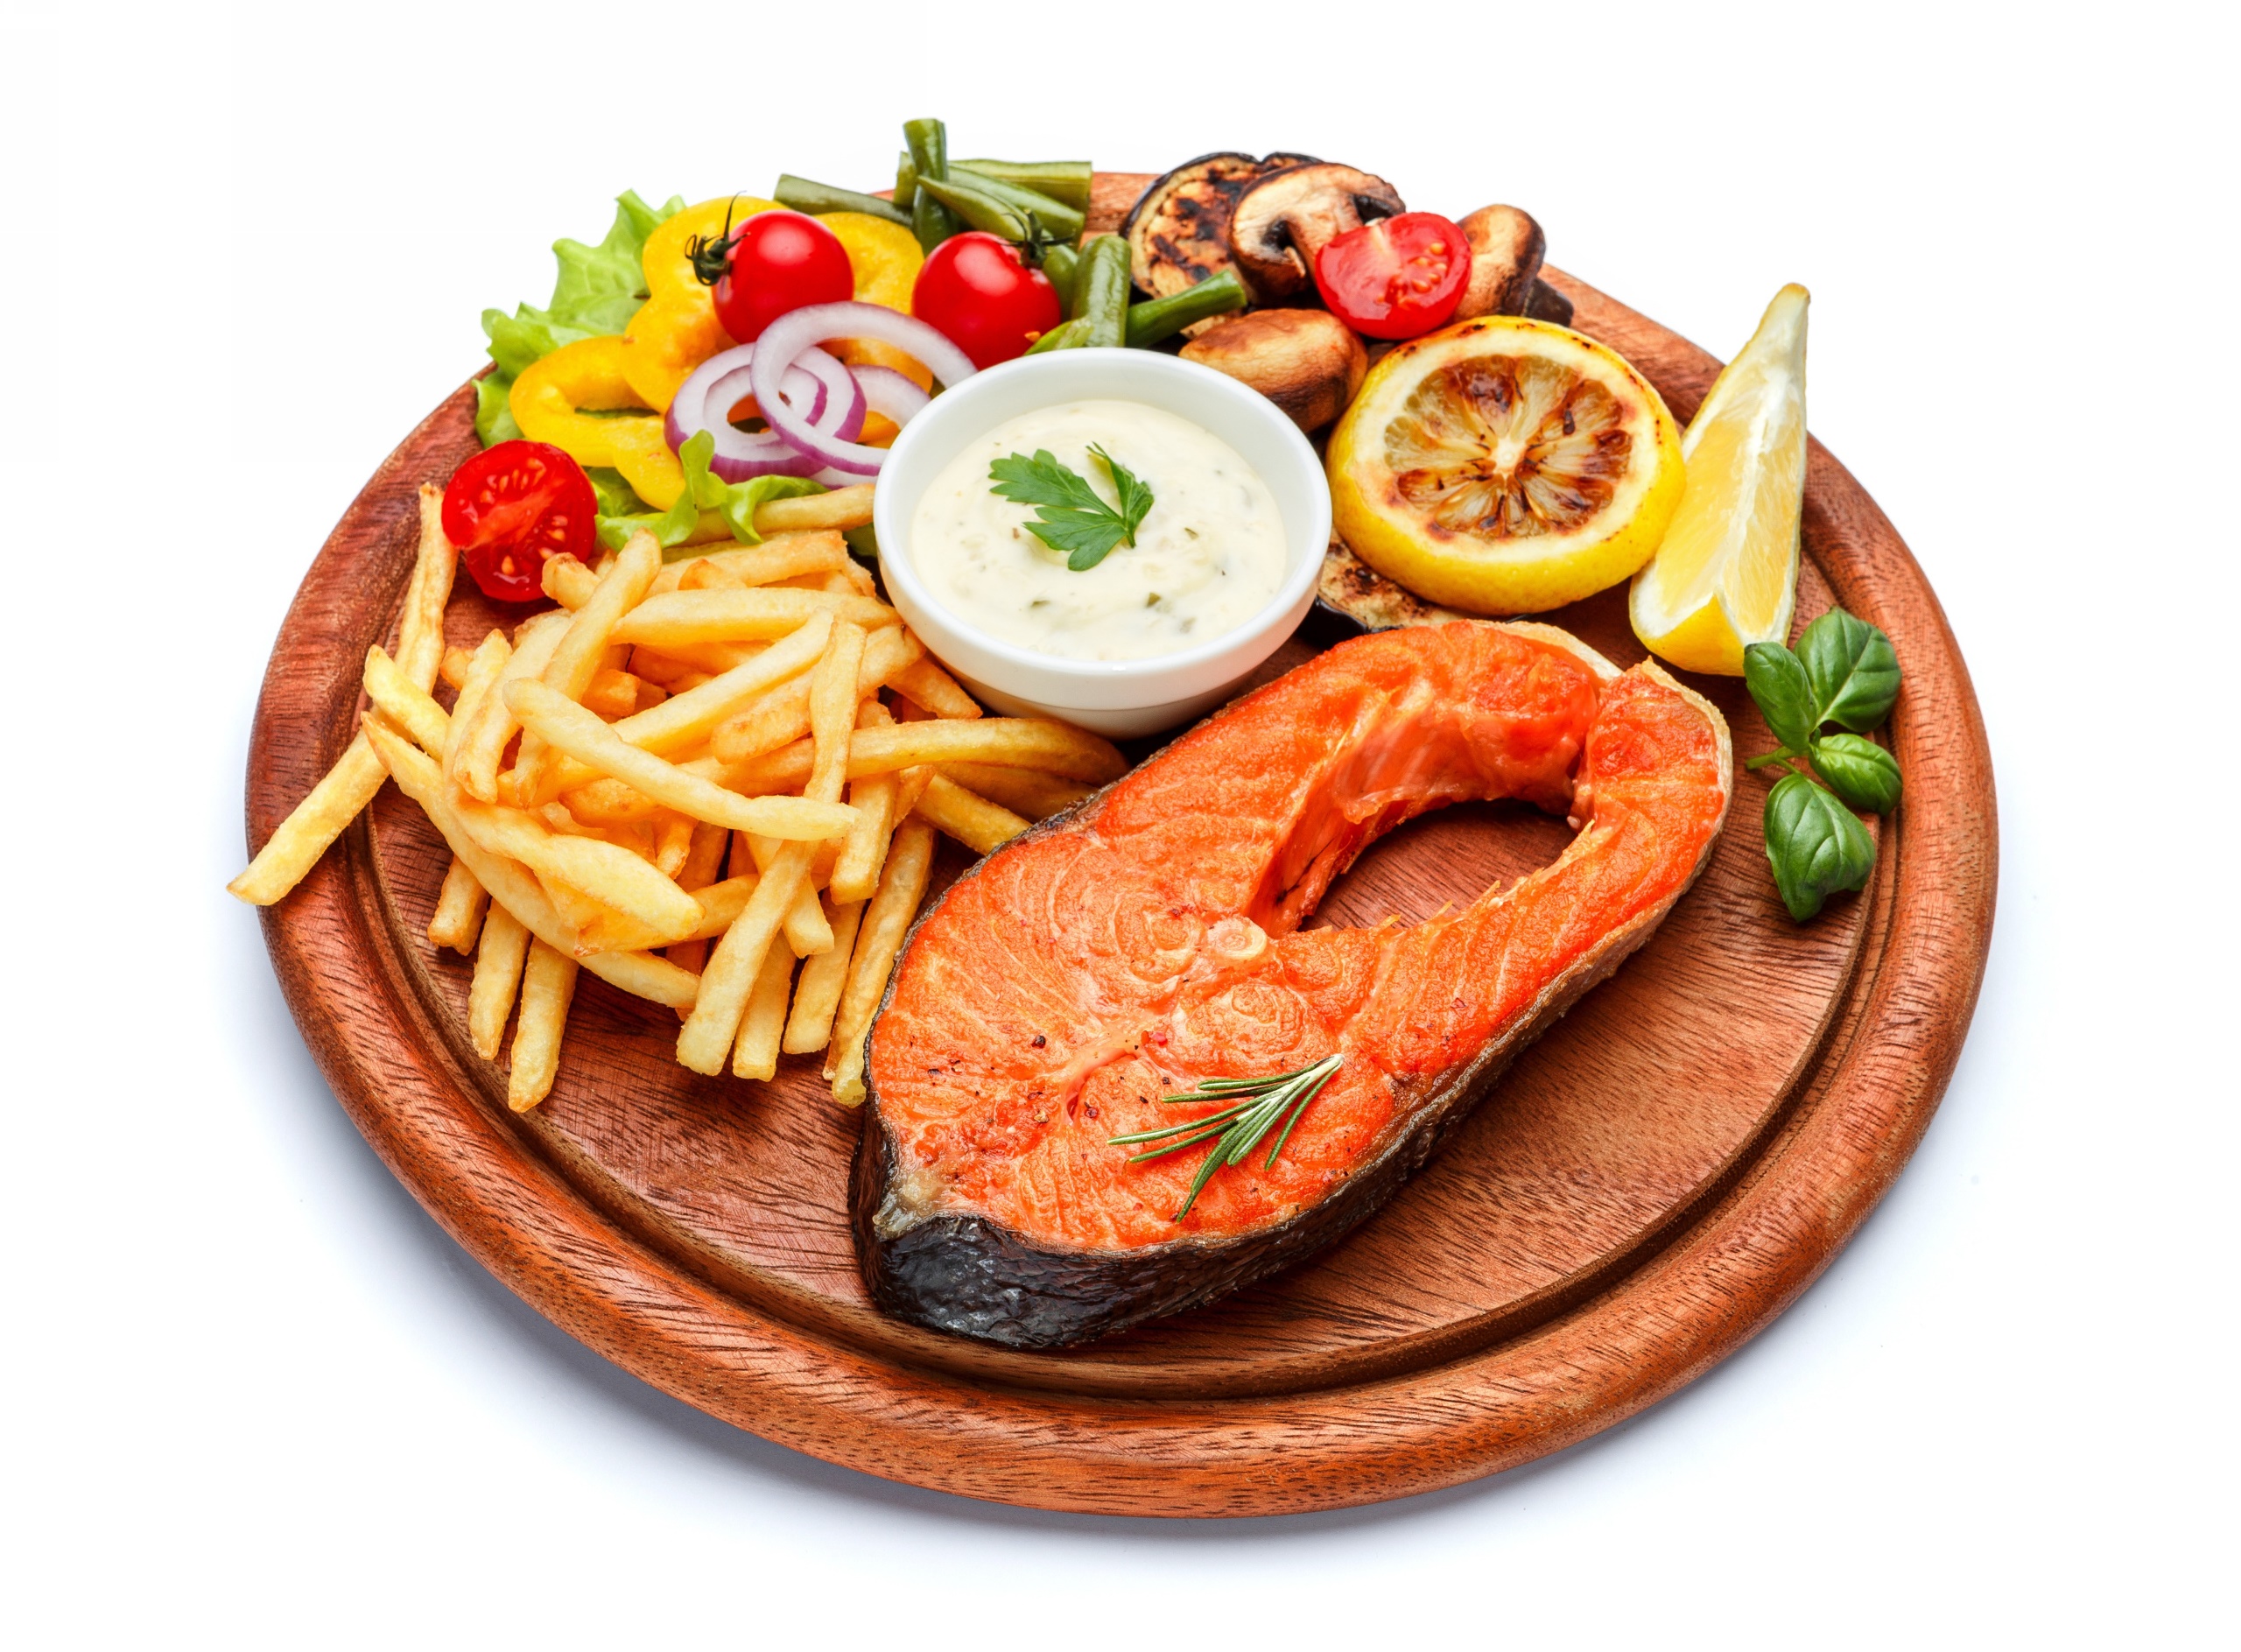 General 2560x1887 food fries fish simple background white background vegetables tomatoes onion lemons beans mushroom plates